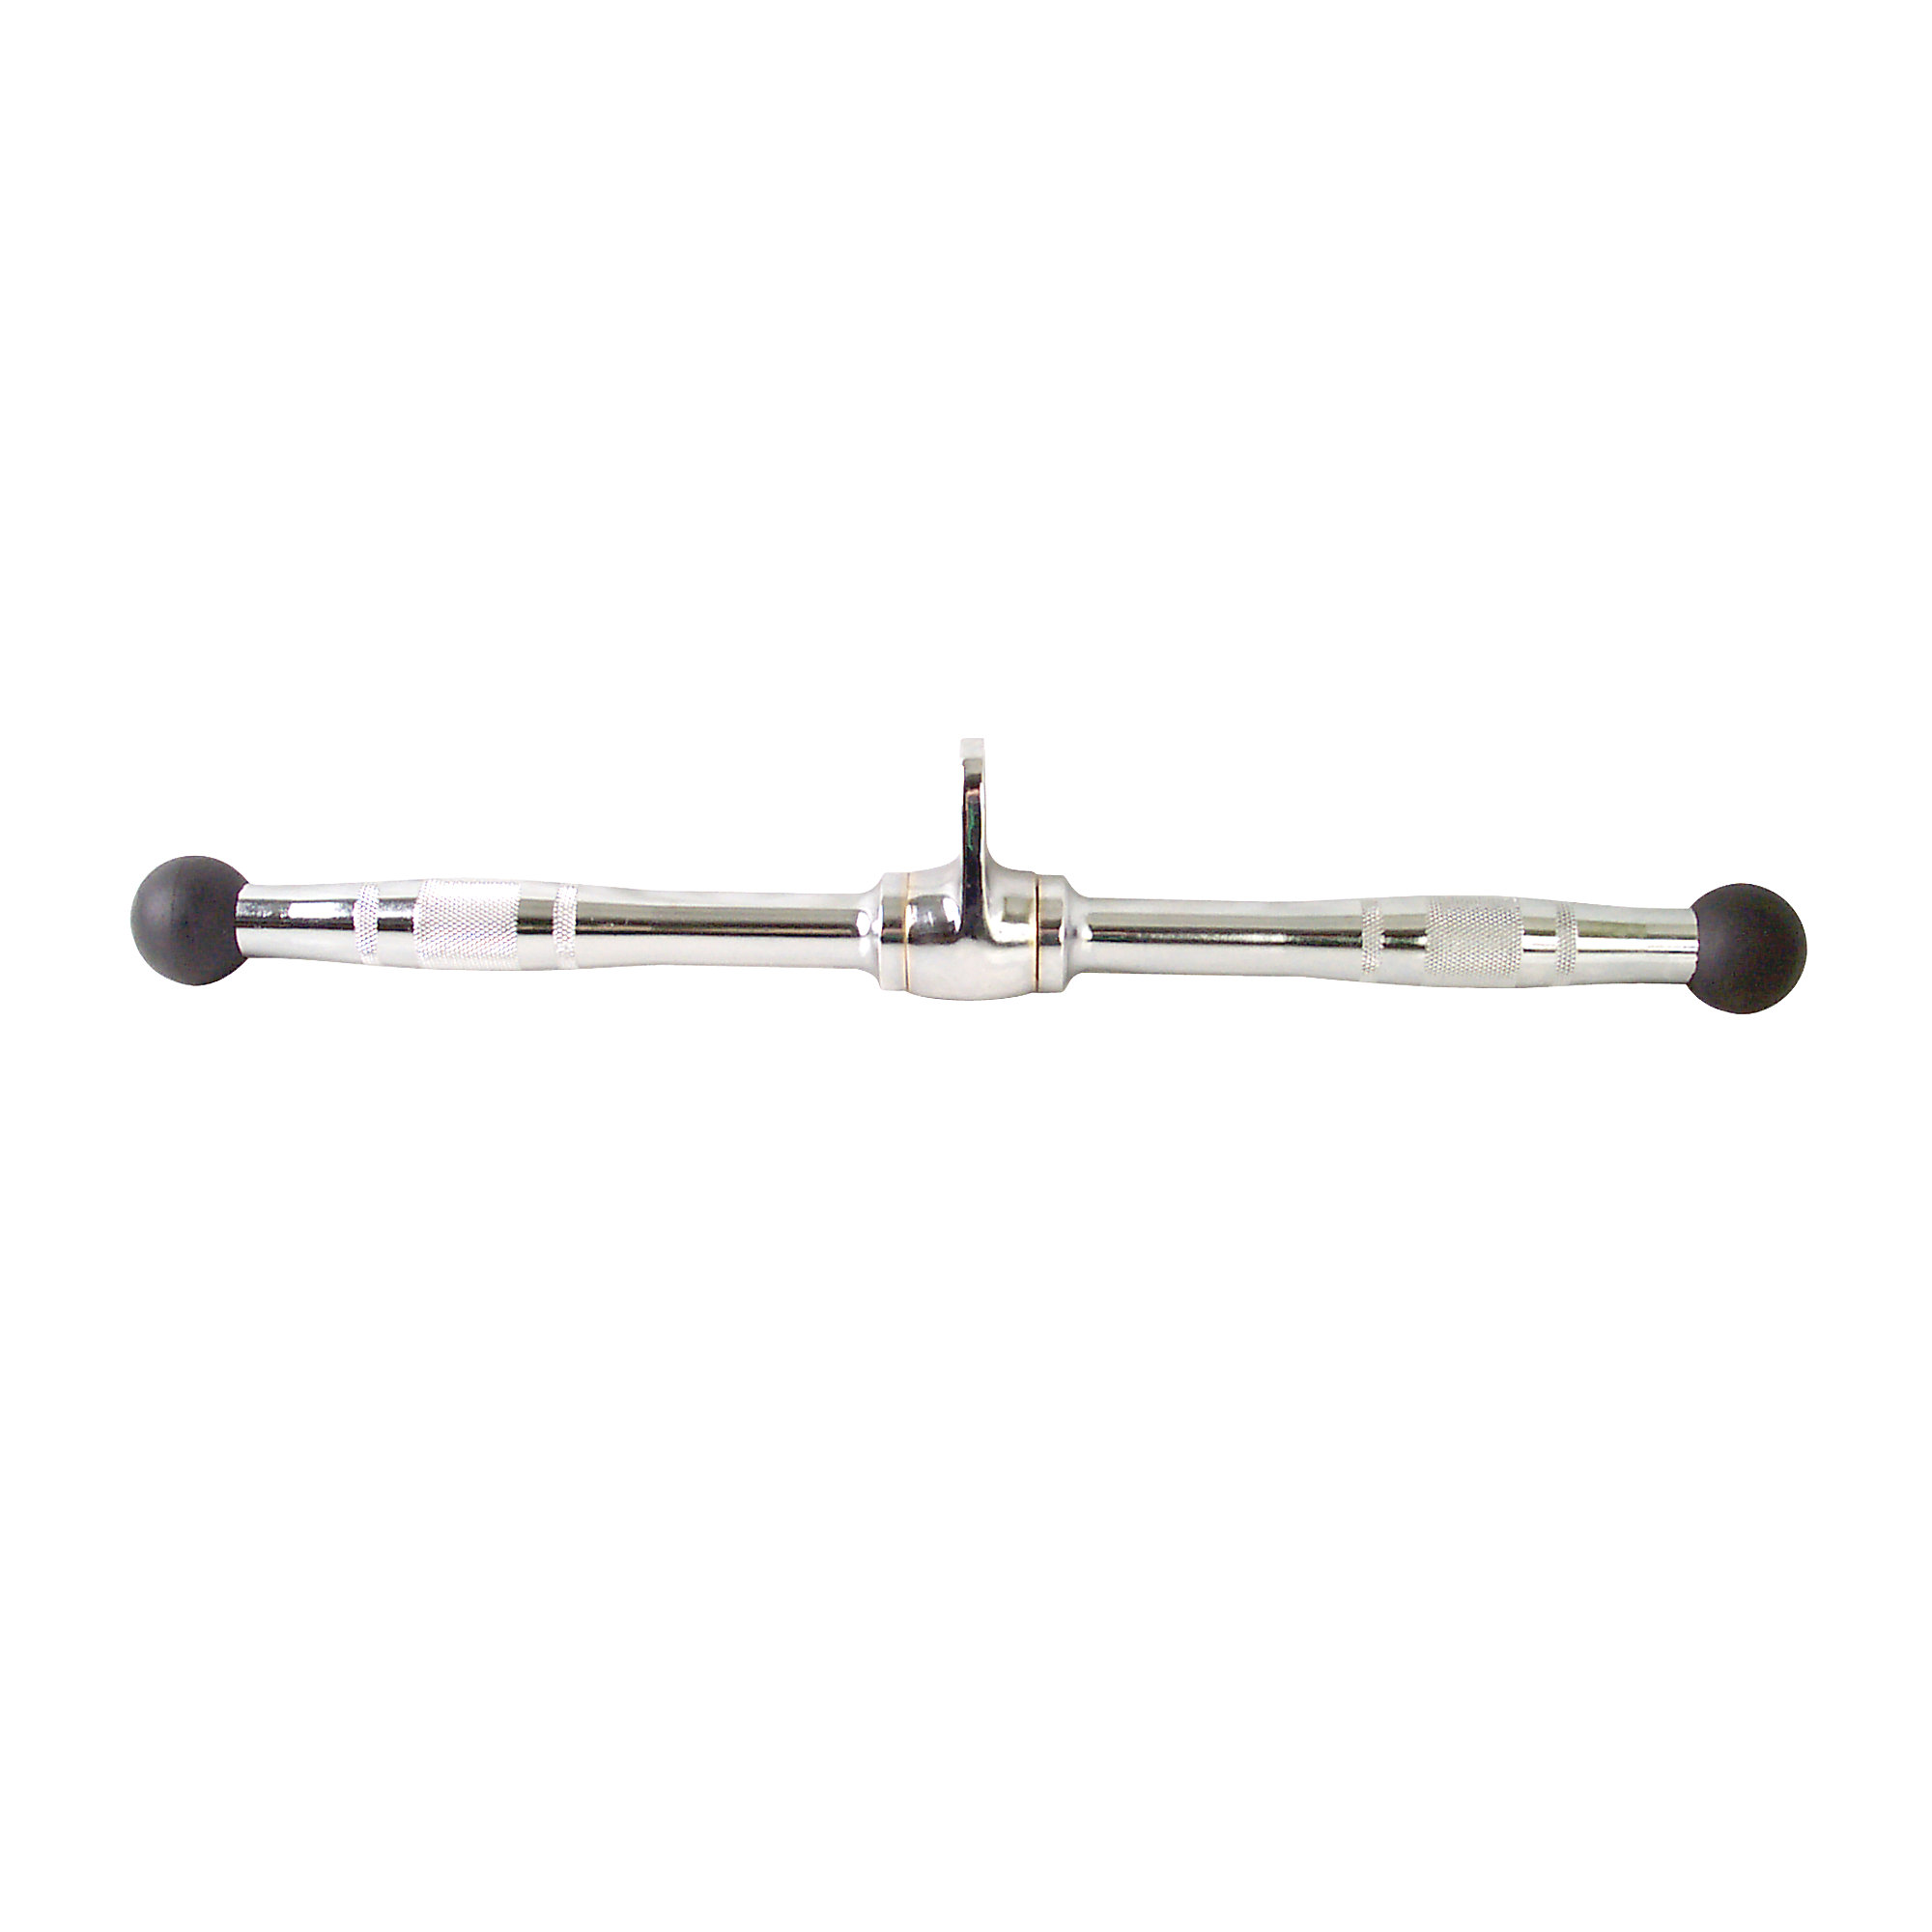 20" Revolving Straight Bar | Cable Attachment with Contoured, Knurled Grips & Rubber Safety Ends